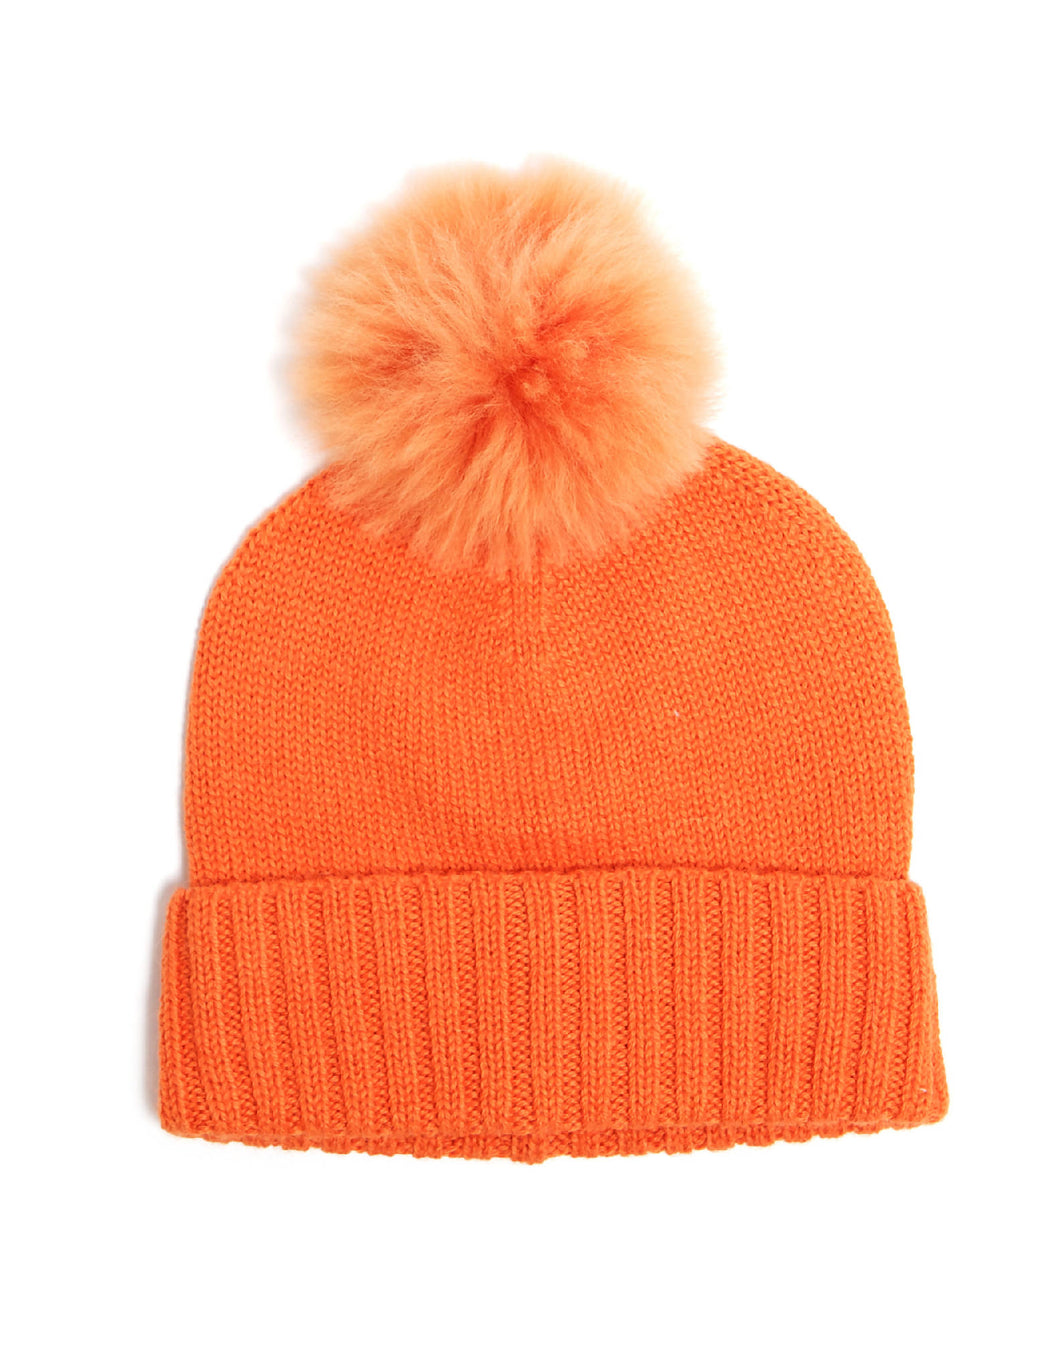 Bobble Beanies - 100% Finest Alpaca Wool (choose from 4 colours)